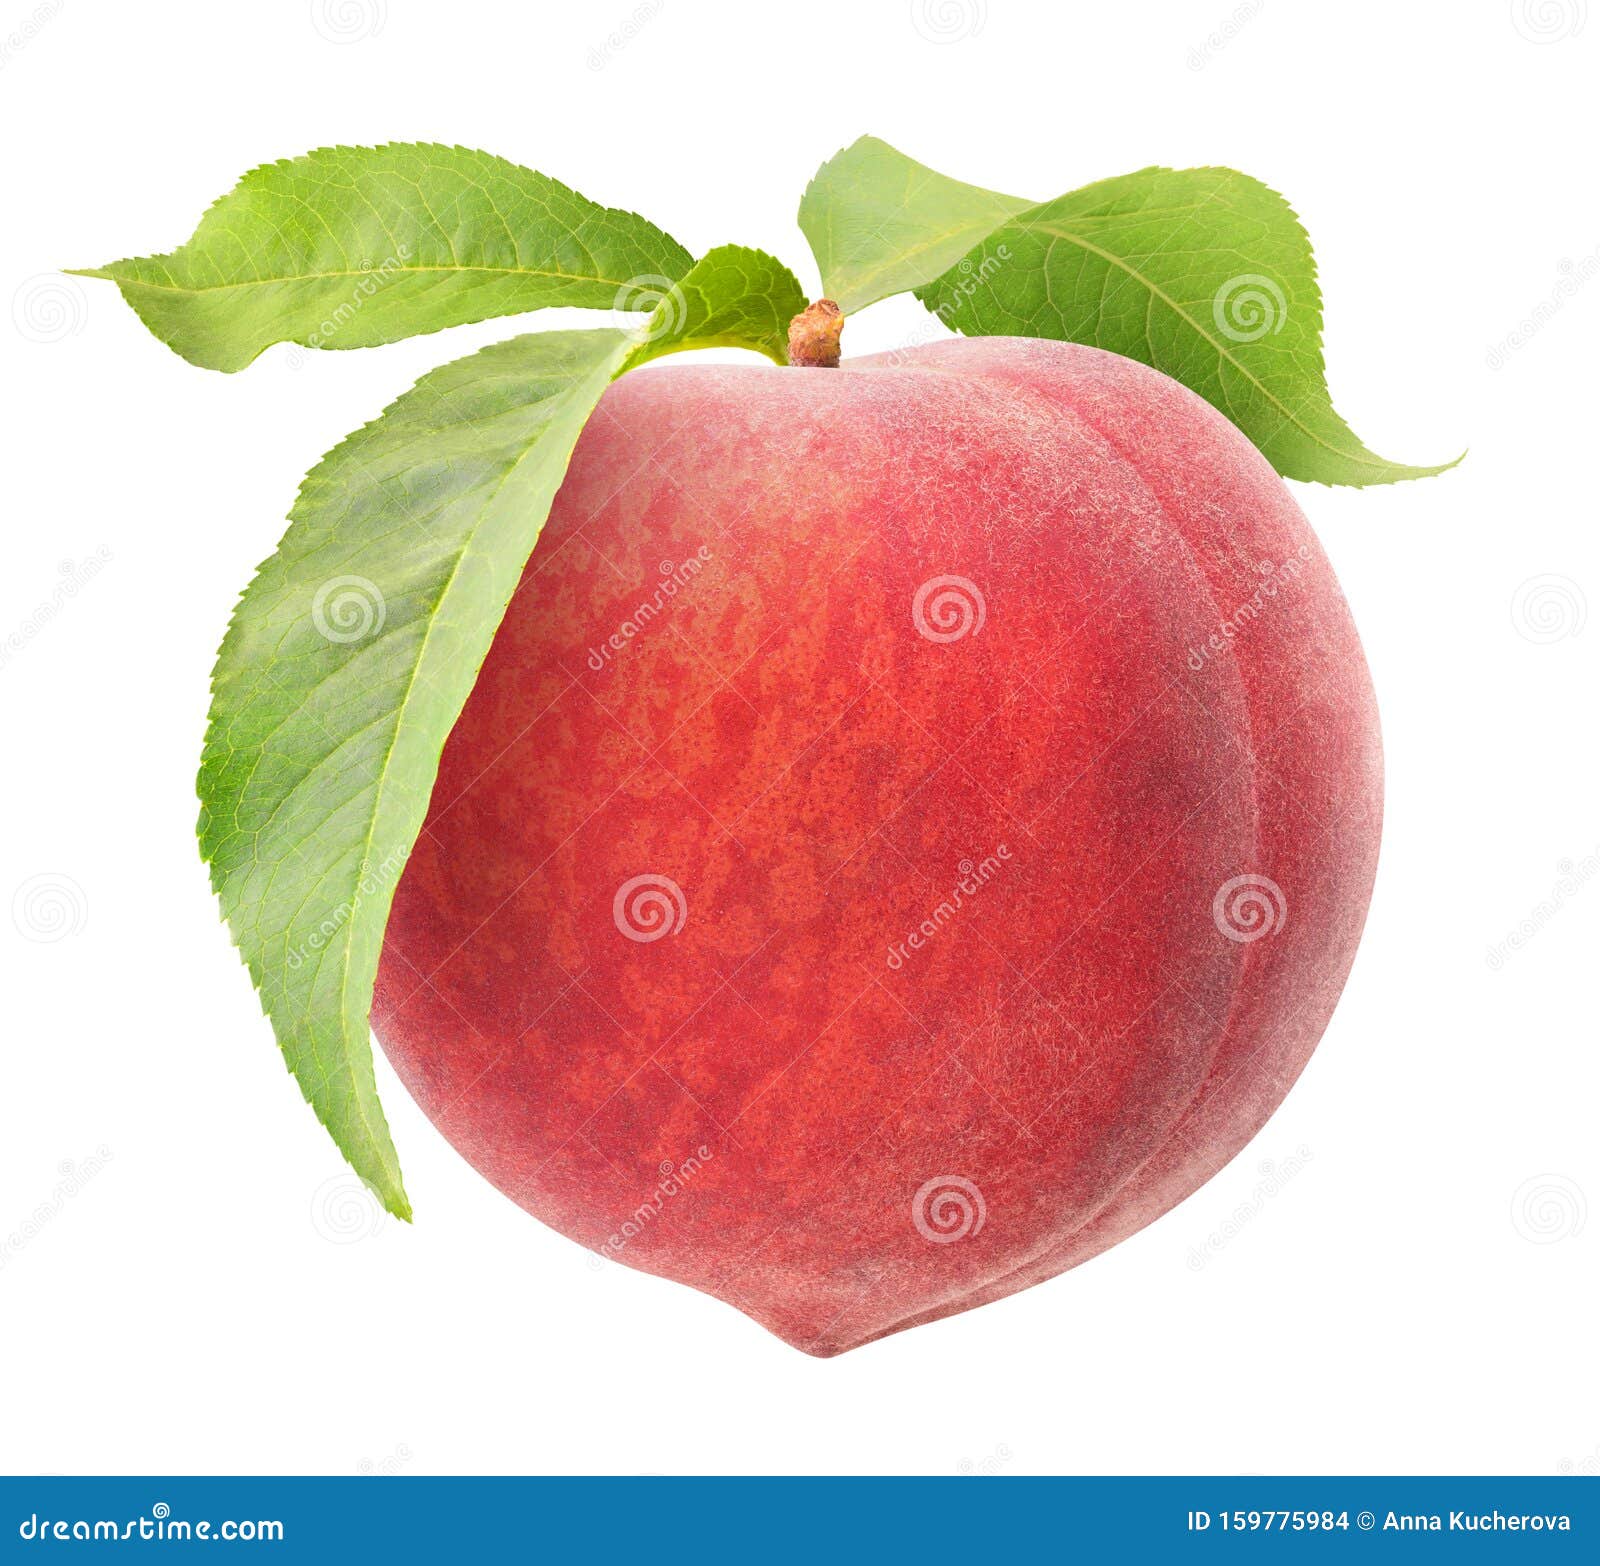  peach with leaves